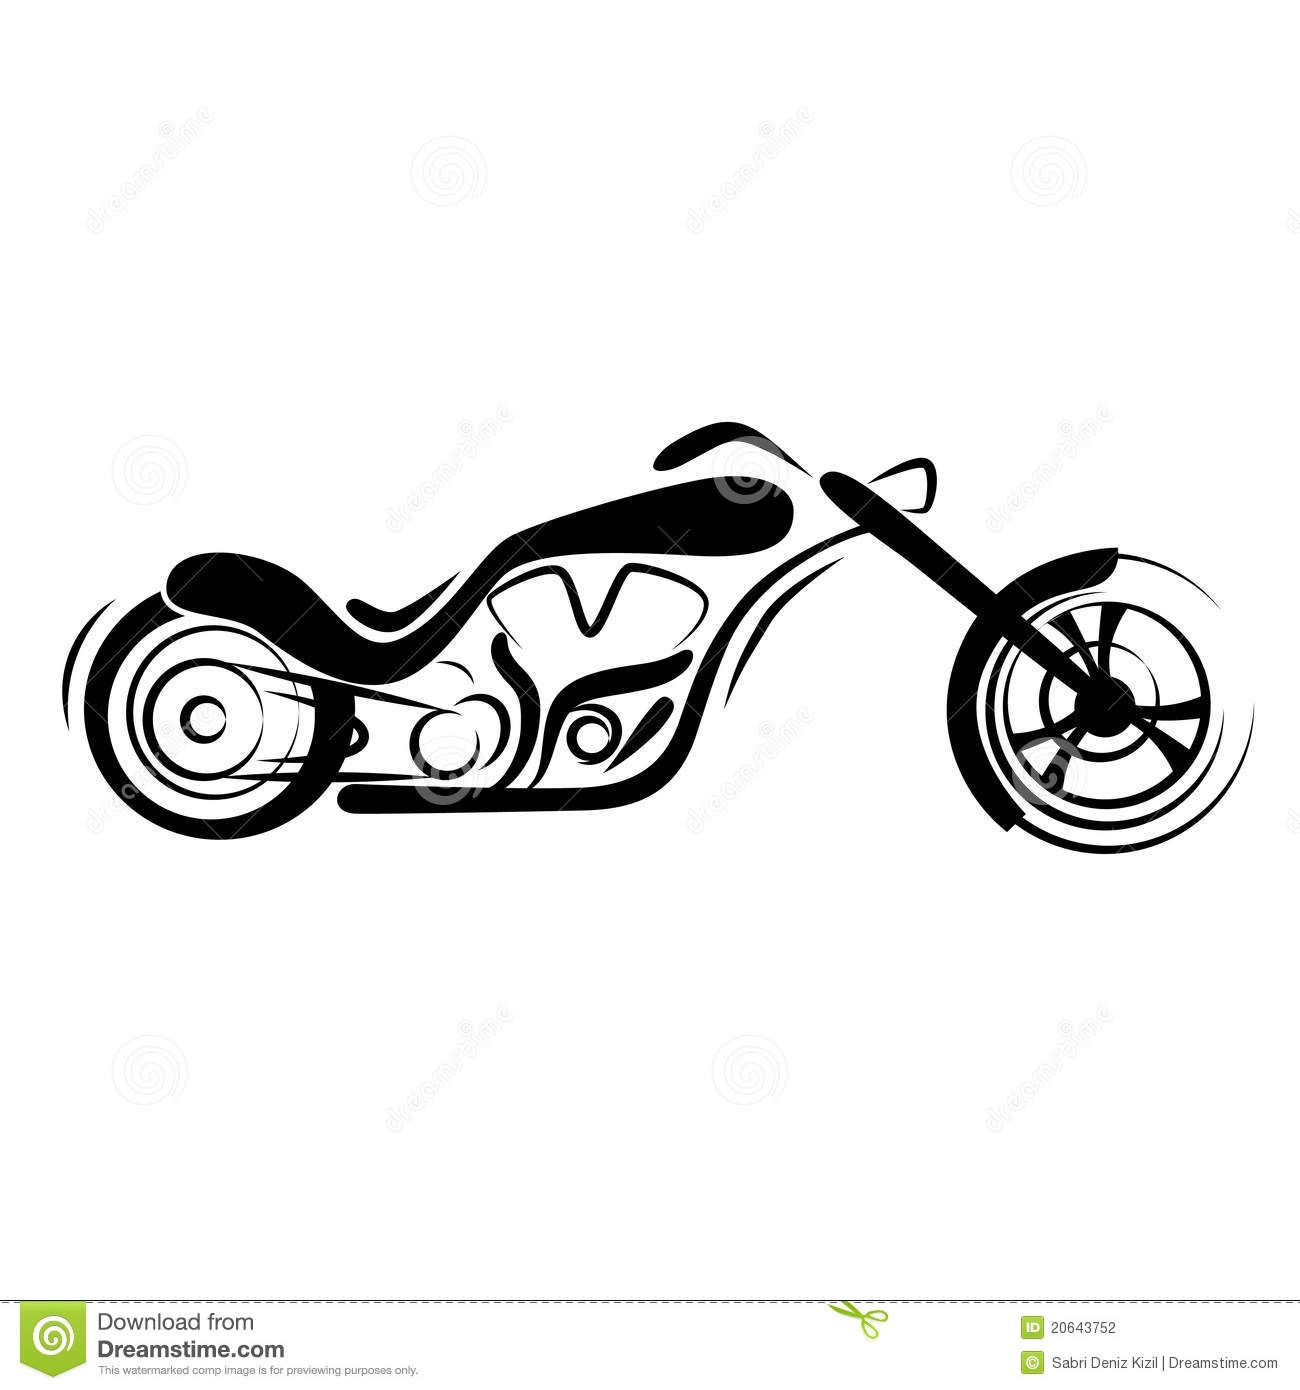 Simple motorcycle clipart.